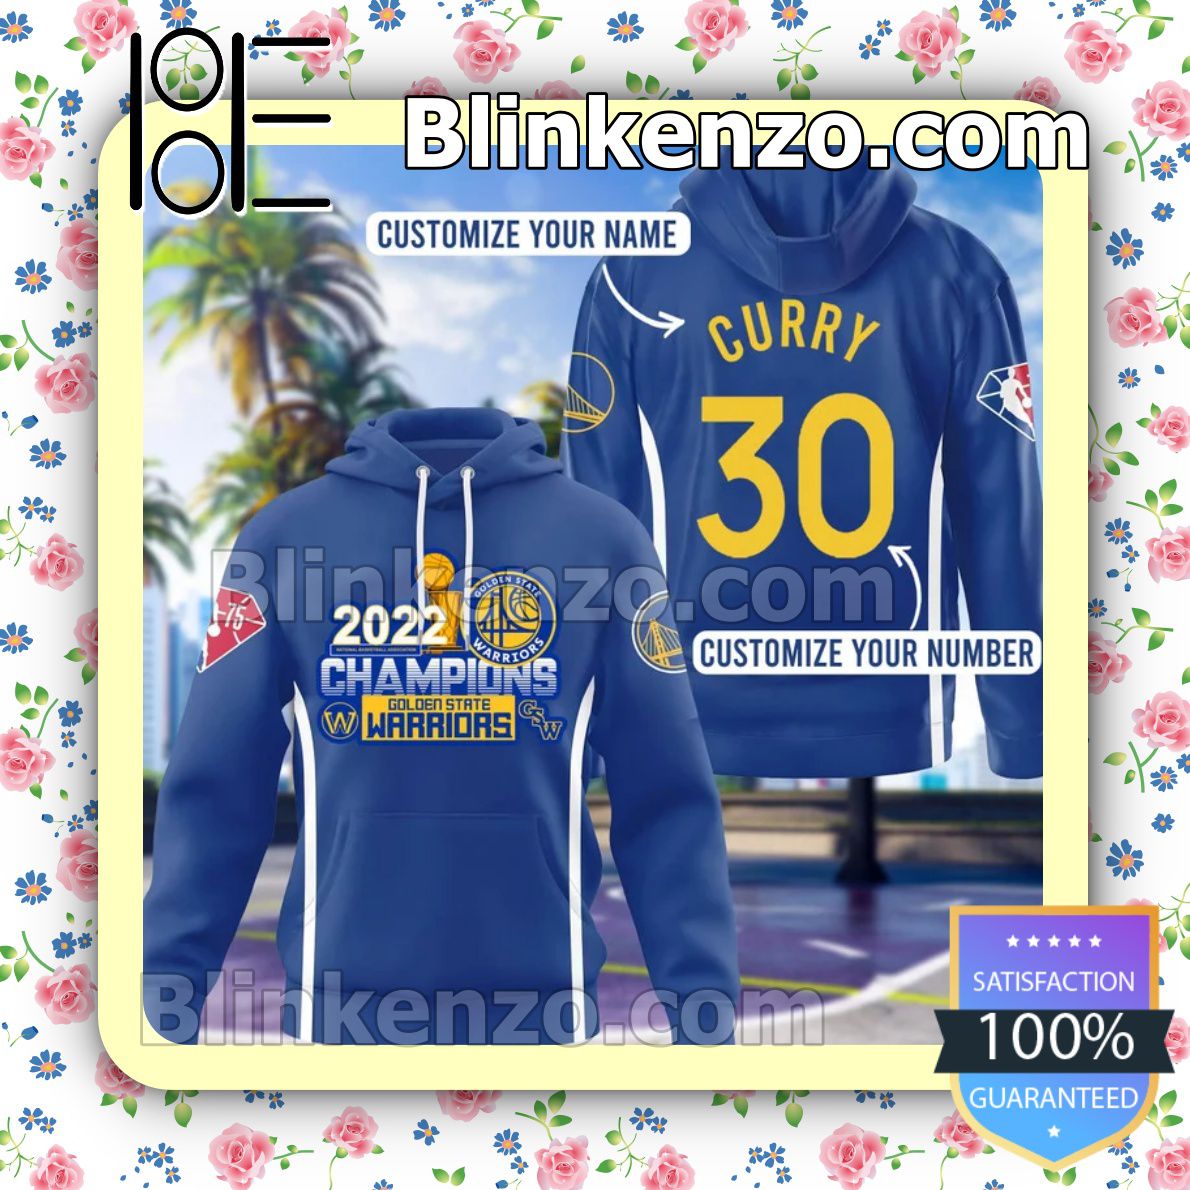 Sale Off Personalized 2022 Champions Golden State Warriors Hoodies, Long Sleeve Shirt